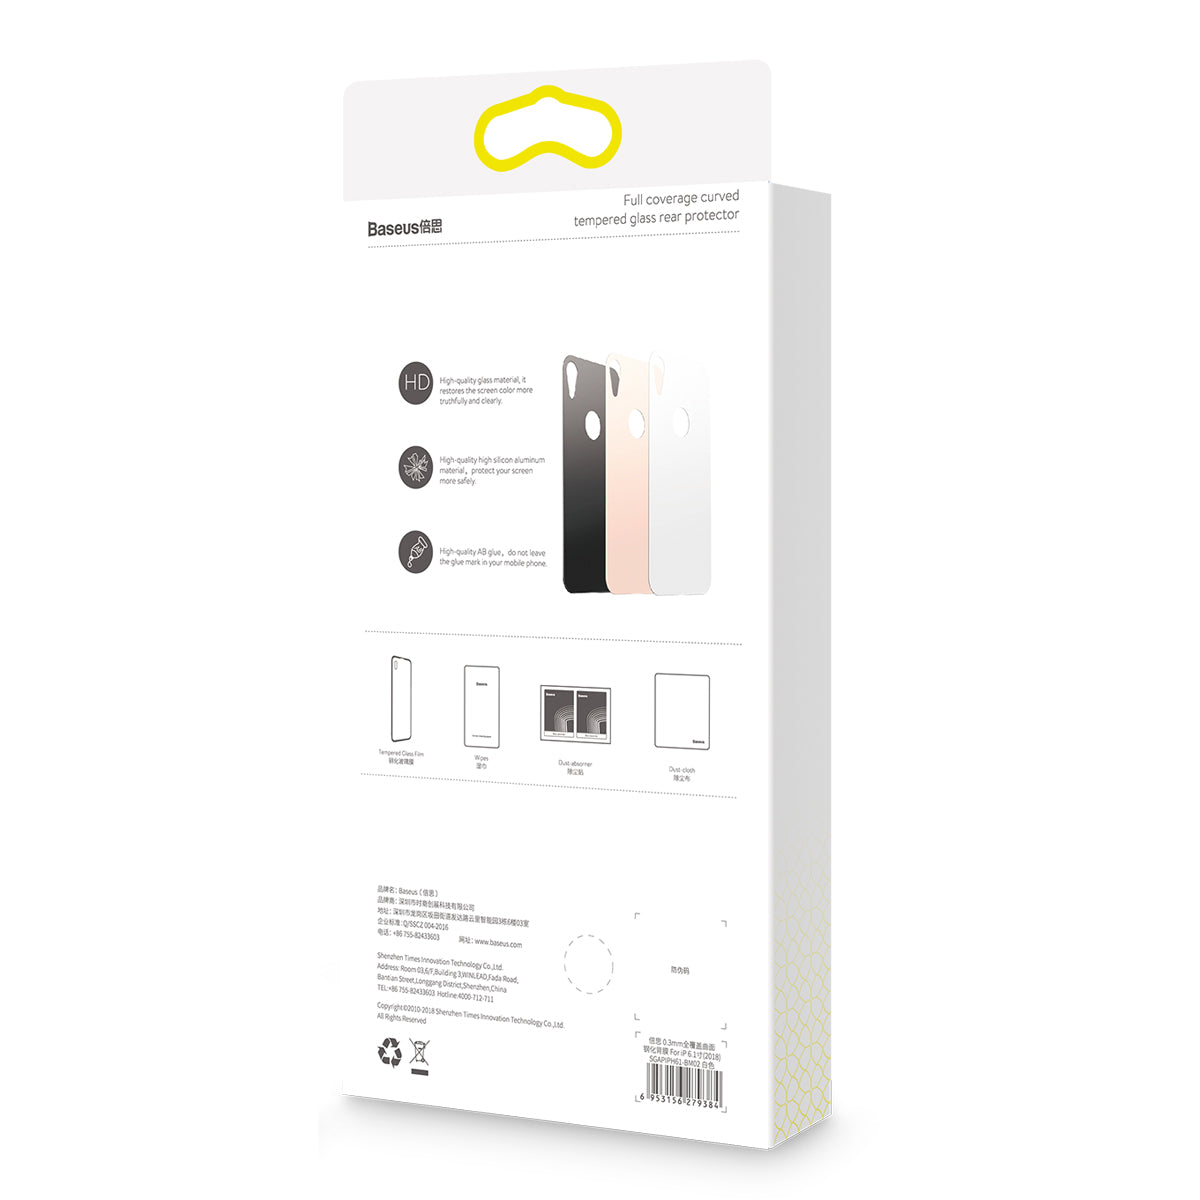 Baseus Back Rear Tempered Glass Protector For iPhone XS Max 0.3mm Full Glass Scratch Resistant